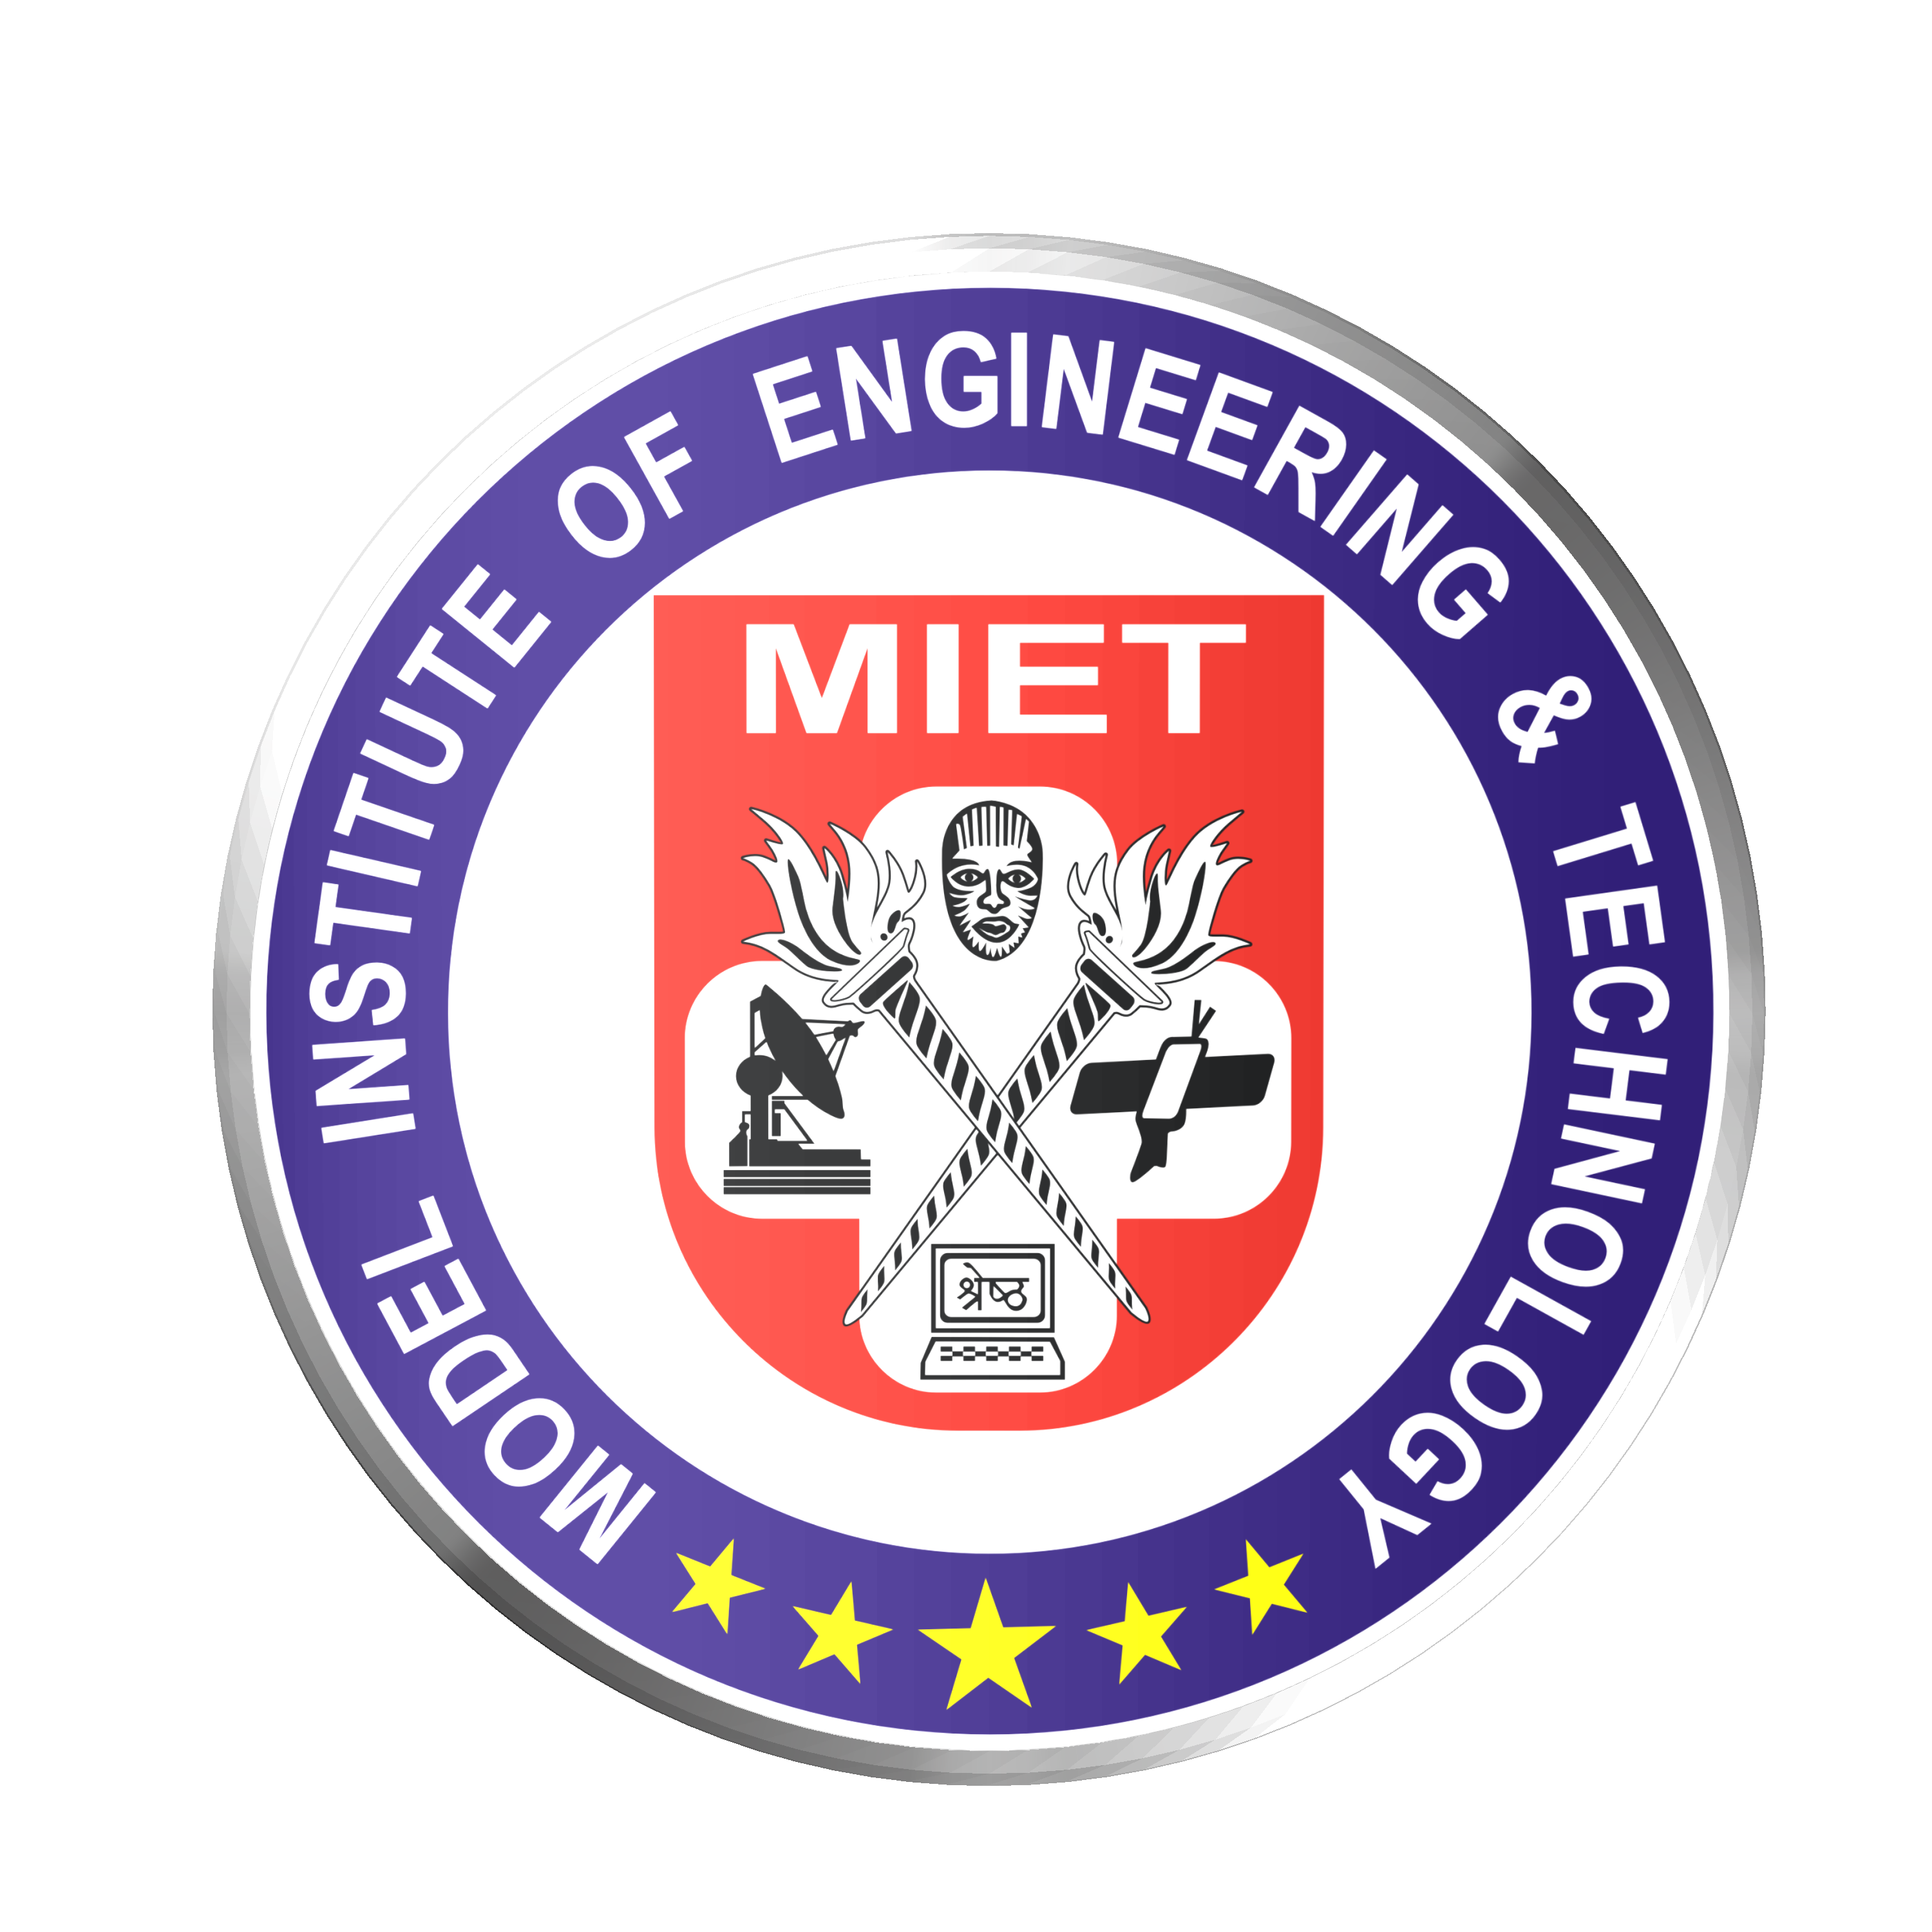 Model Institute of Engineering and Technology logo